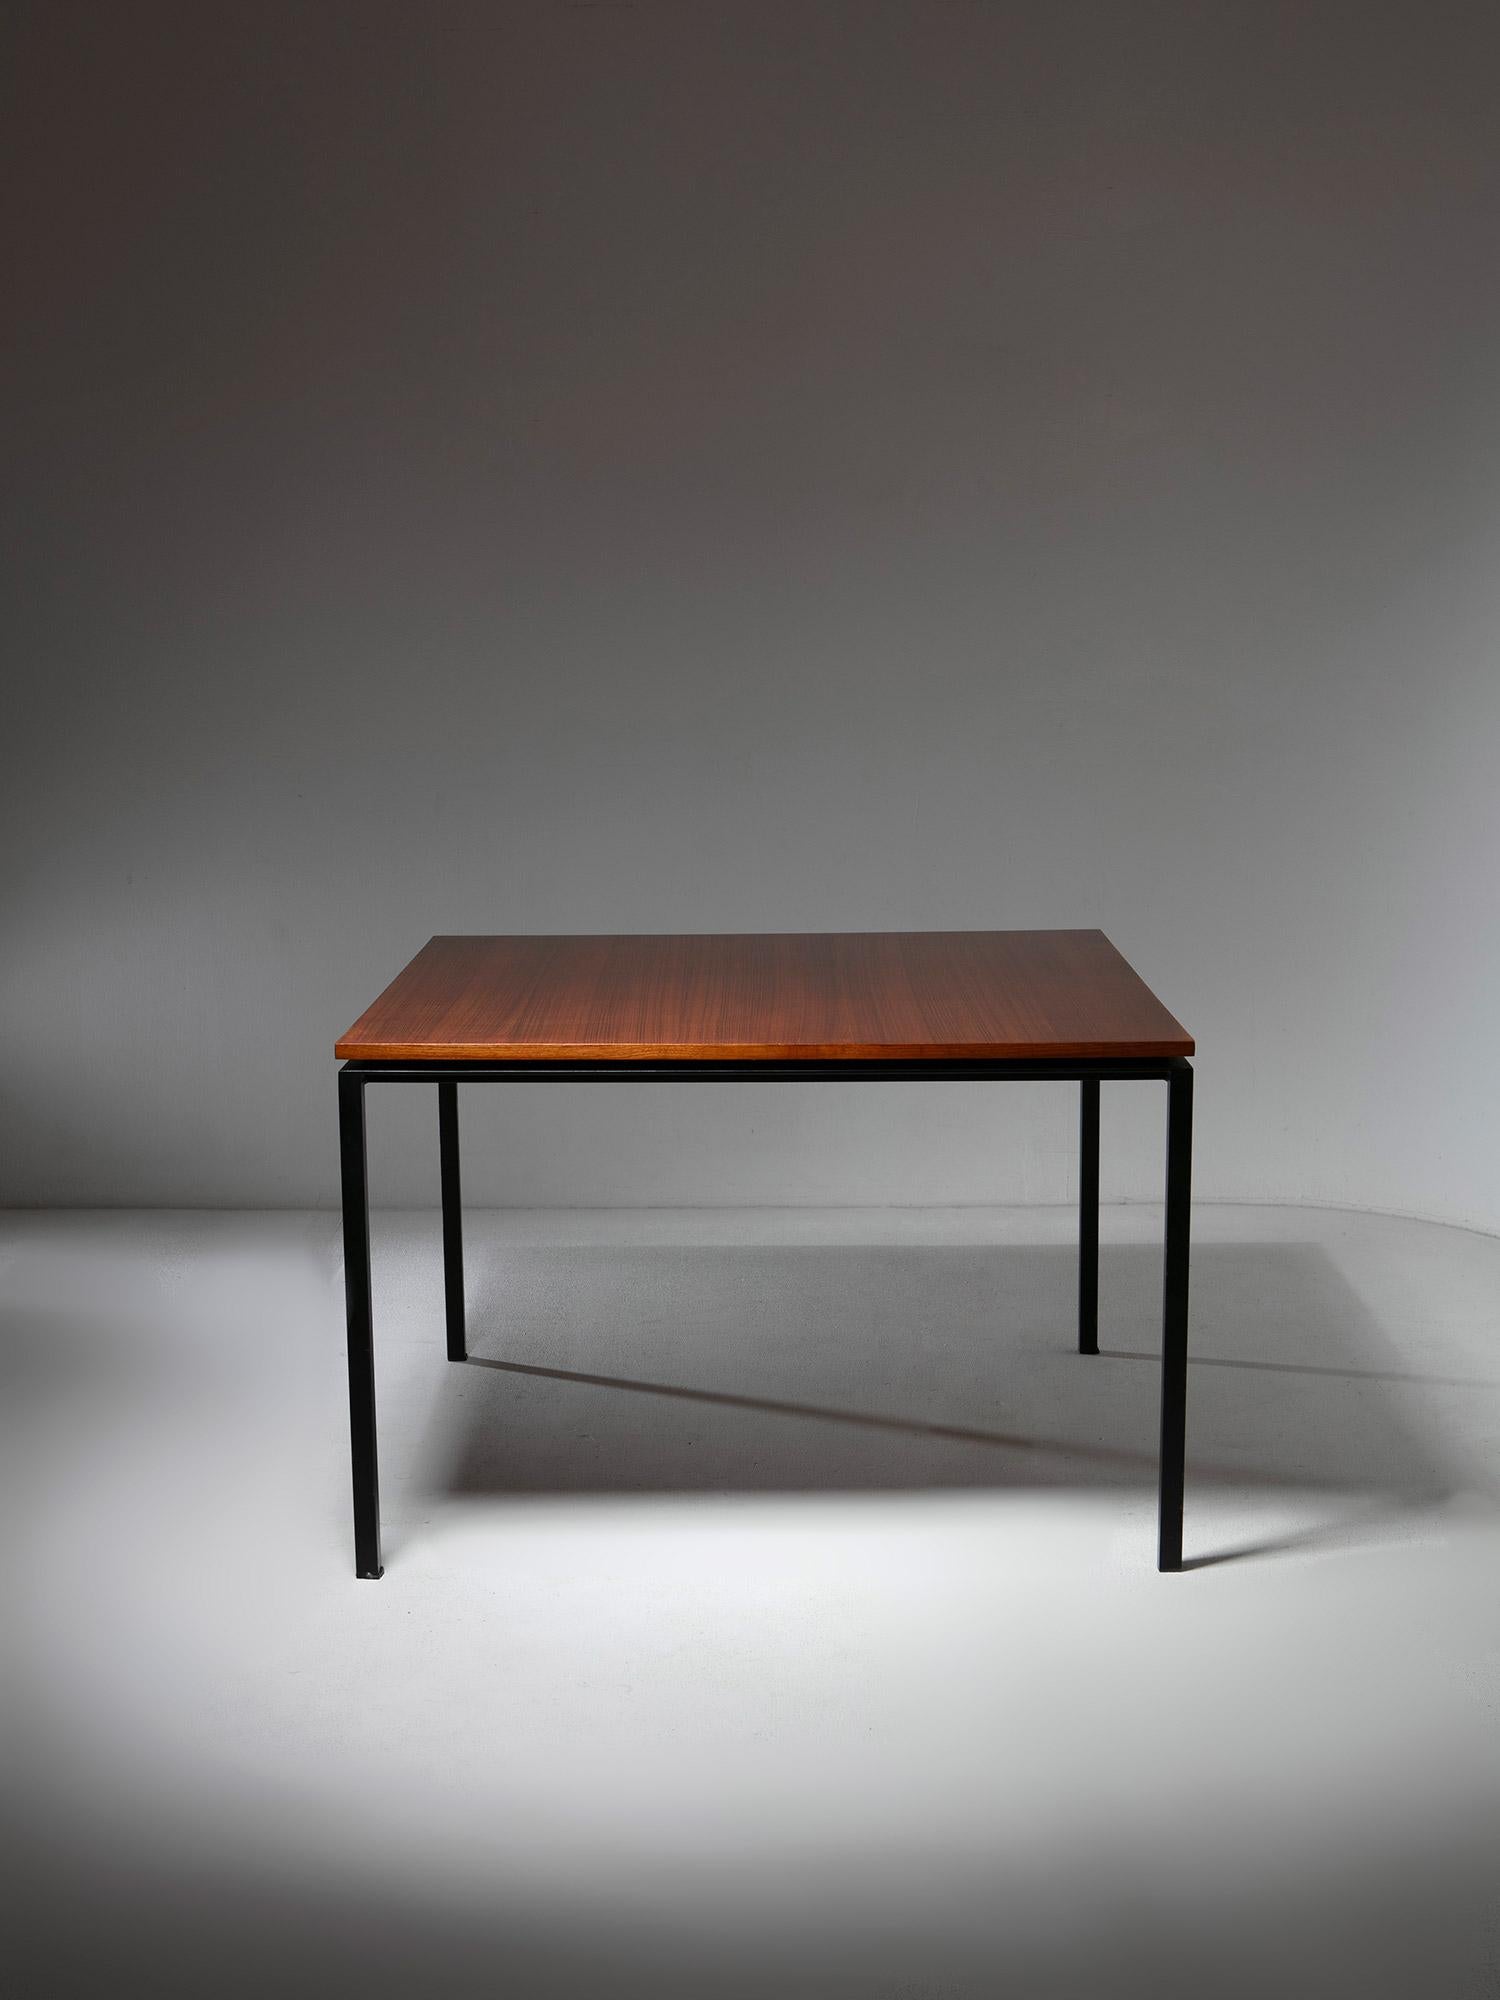 Italian Wood Squared Dining Table by Paolo Tilche for Arform, Italy, 1950s For Sale